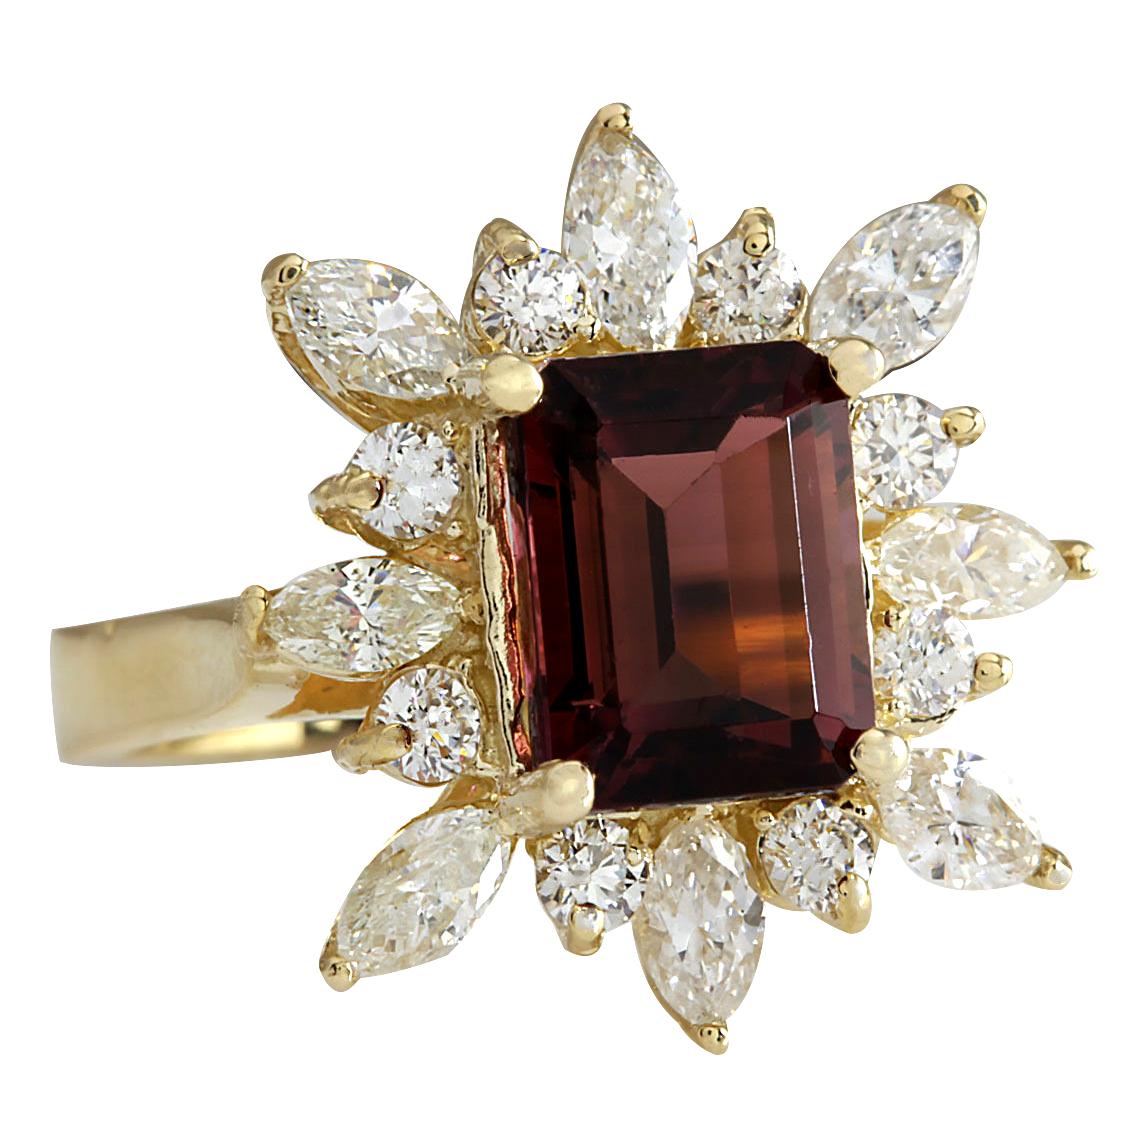 4.43 Carat Natural Tourmaline 14 Karat Yellow Gold Diamond Ring
Stamped: 14K Yellow Gold
Total Ring Weight: 5.9 Grams
Total Natural Tourmaline Weight is 2.93 Carat (Measures: 9.00x7.00 mm)
Color: Red
Total Natural Diamond Weight is 1.50 Carat
Color: